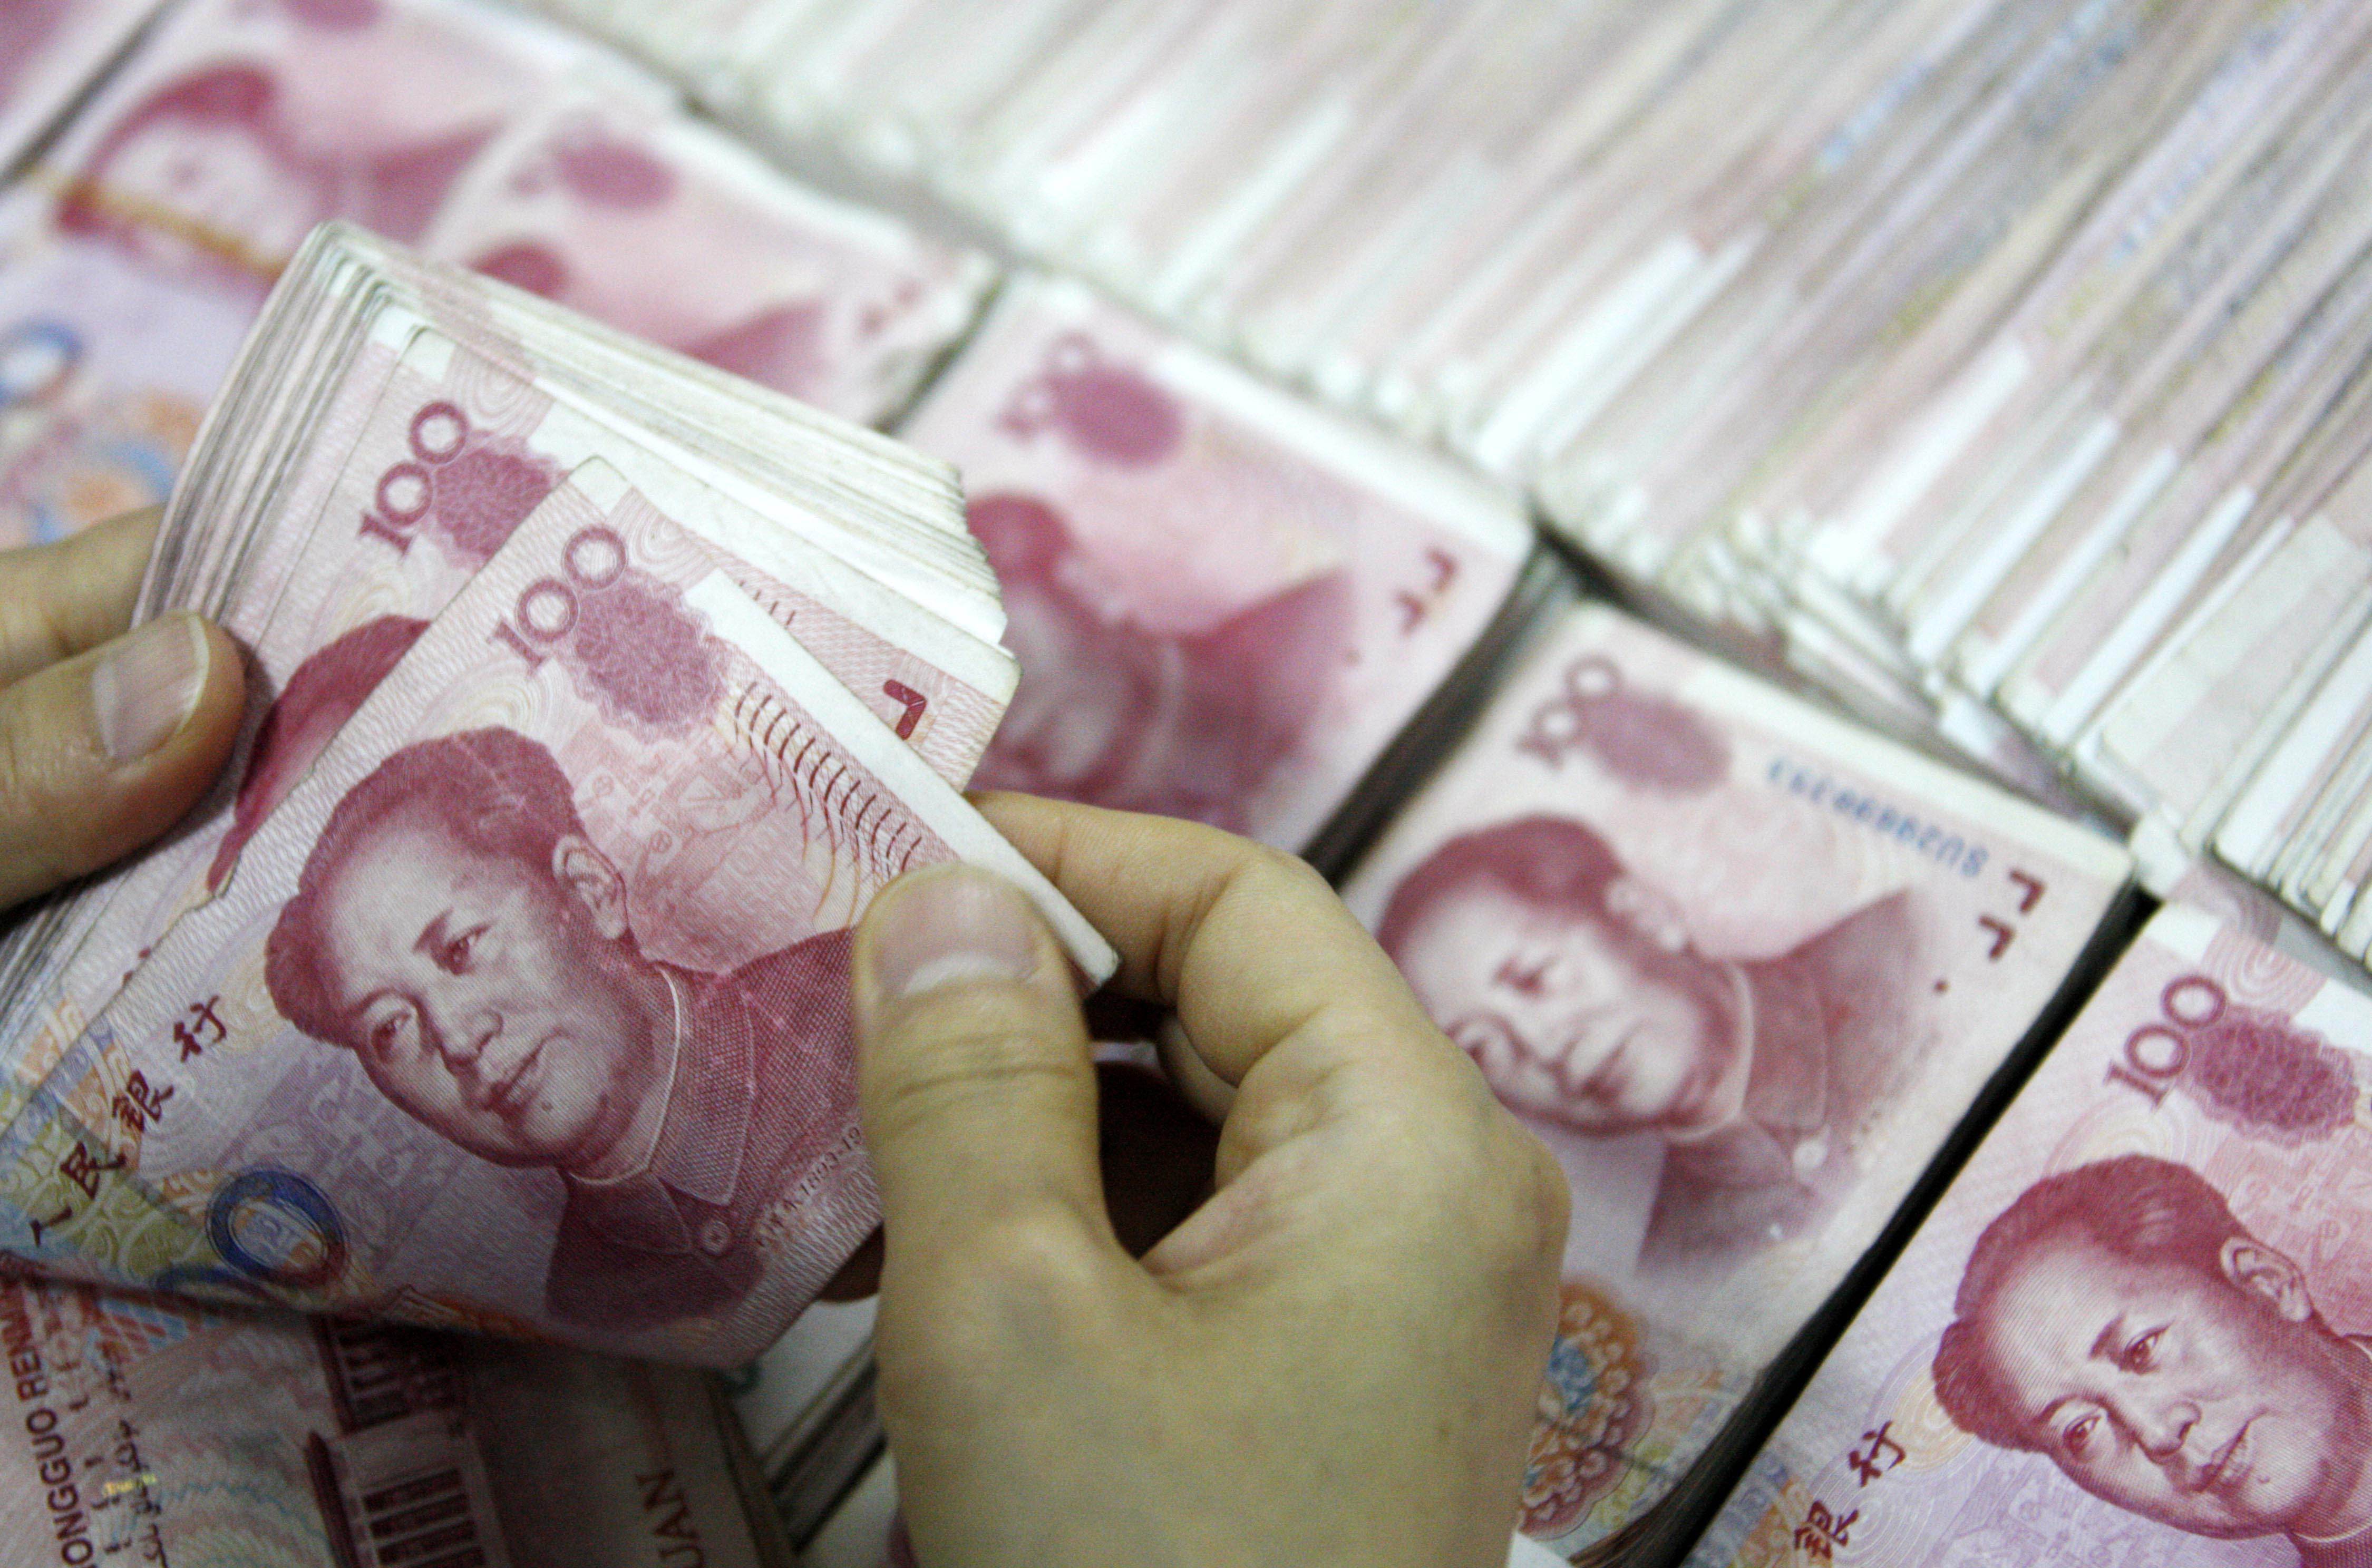 Chinese yuan notes are counted off as the currency strengthened after two US senators asked the IMF to hold off on adding the renmimbi to the IMF's SDR basket. Photo: AFP